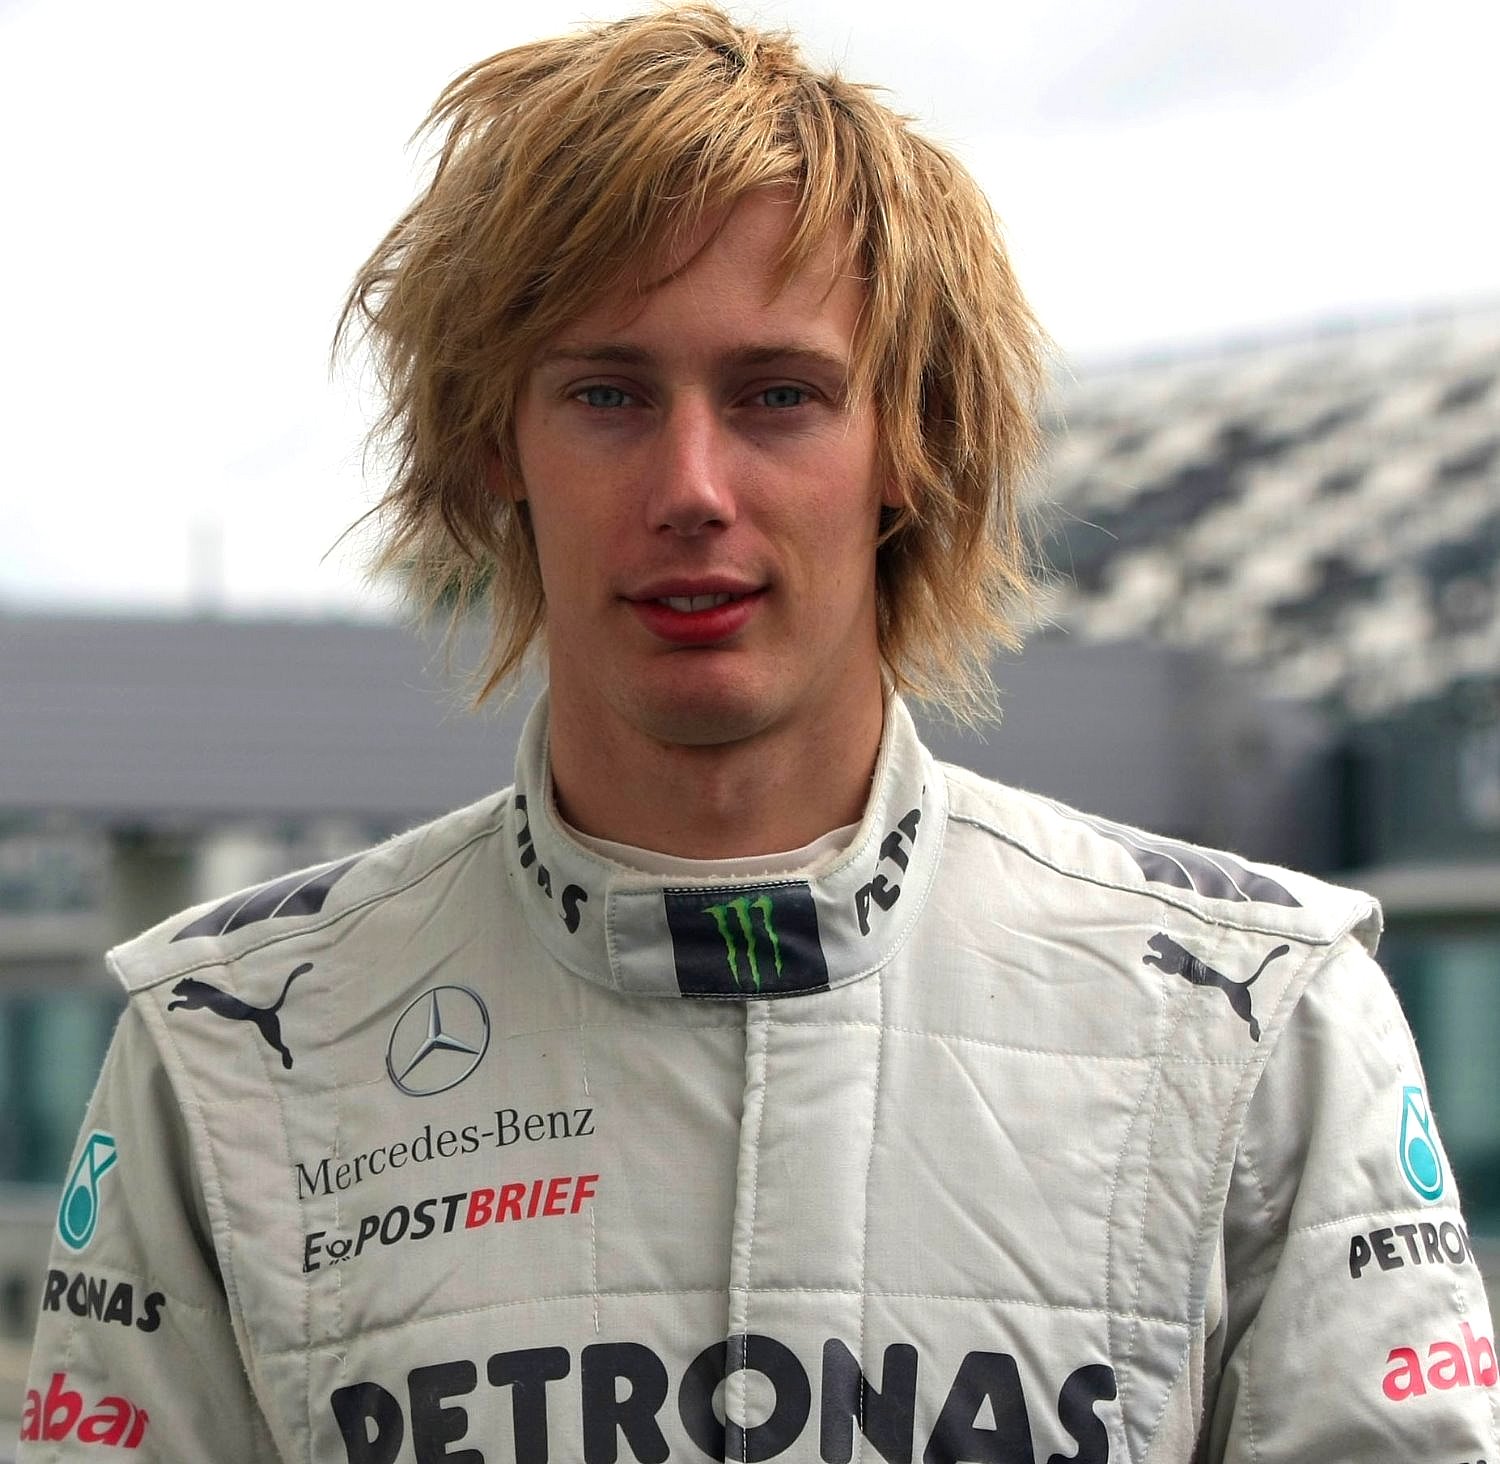 F1 test driver Brendon Hartley to race in Bathurst 12 Hours